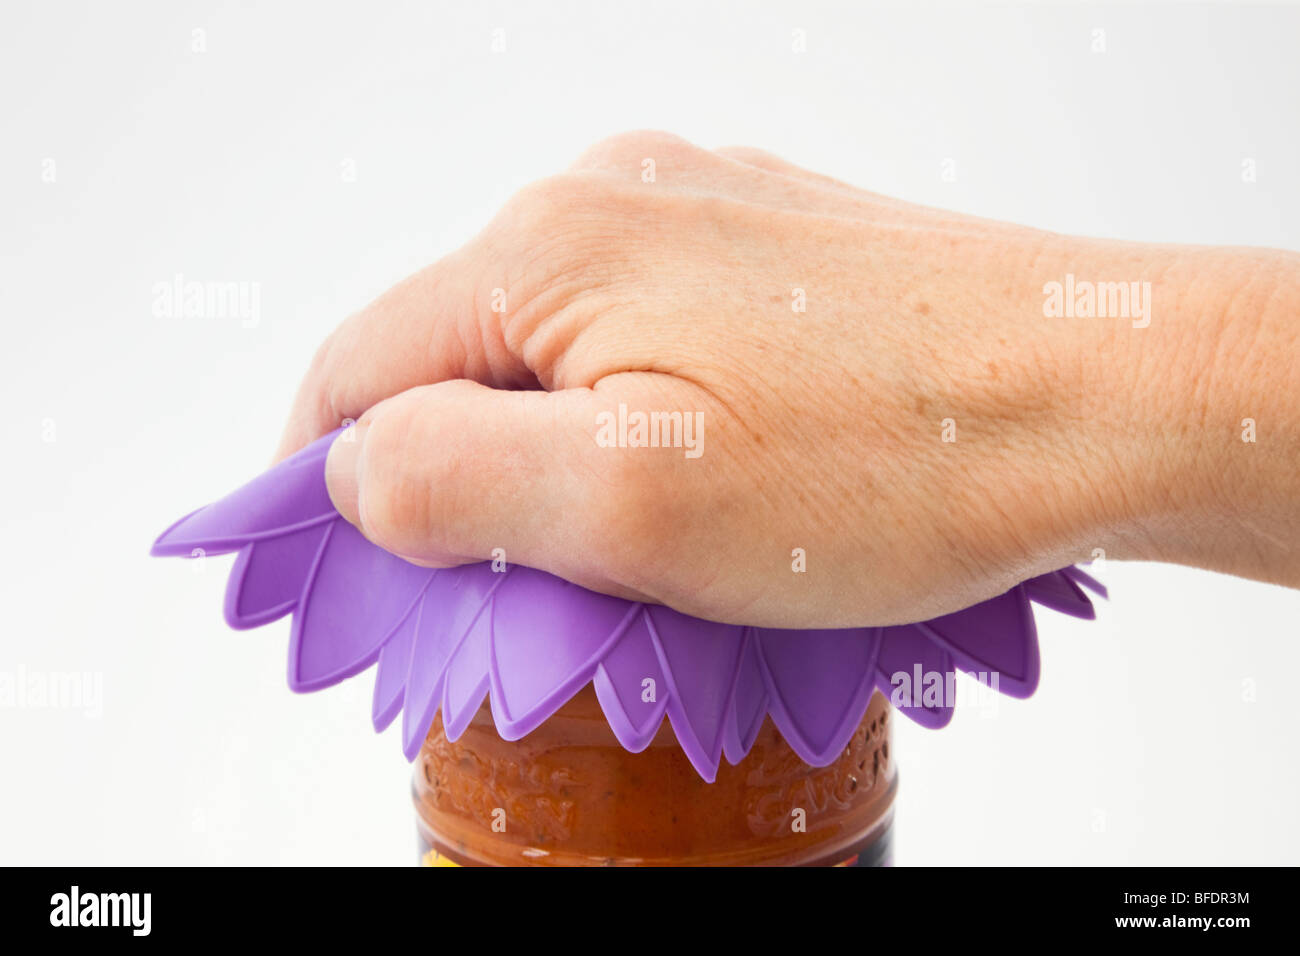 Mature person's hand twisting open a food jar using a silicone rubber trivet to take the top off. England UK Stock Photo